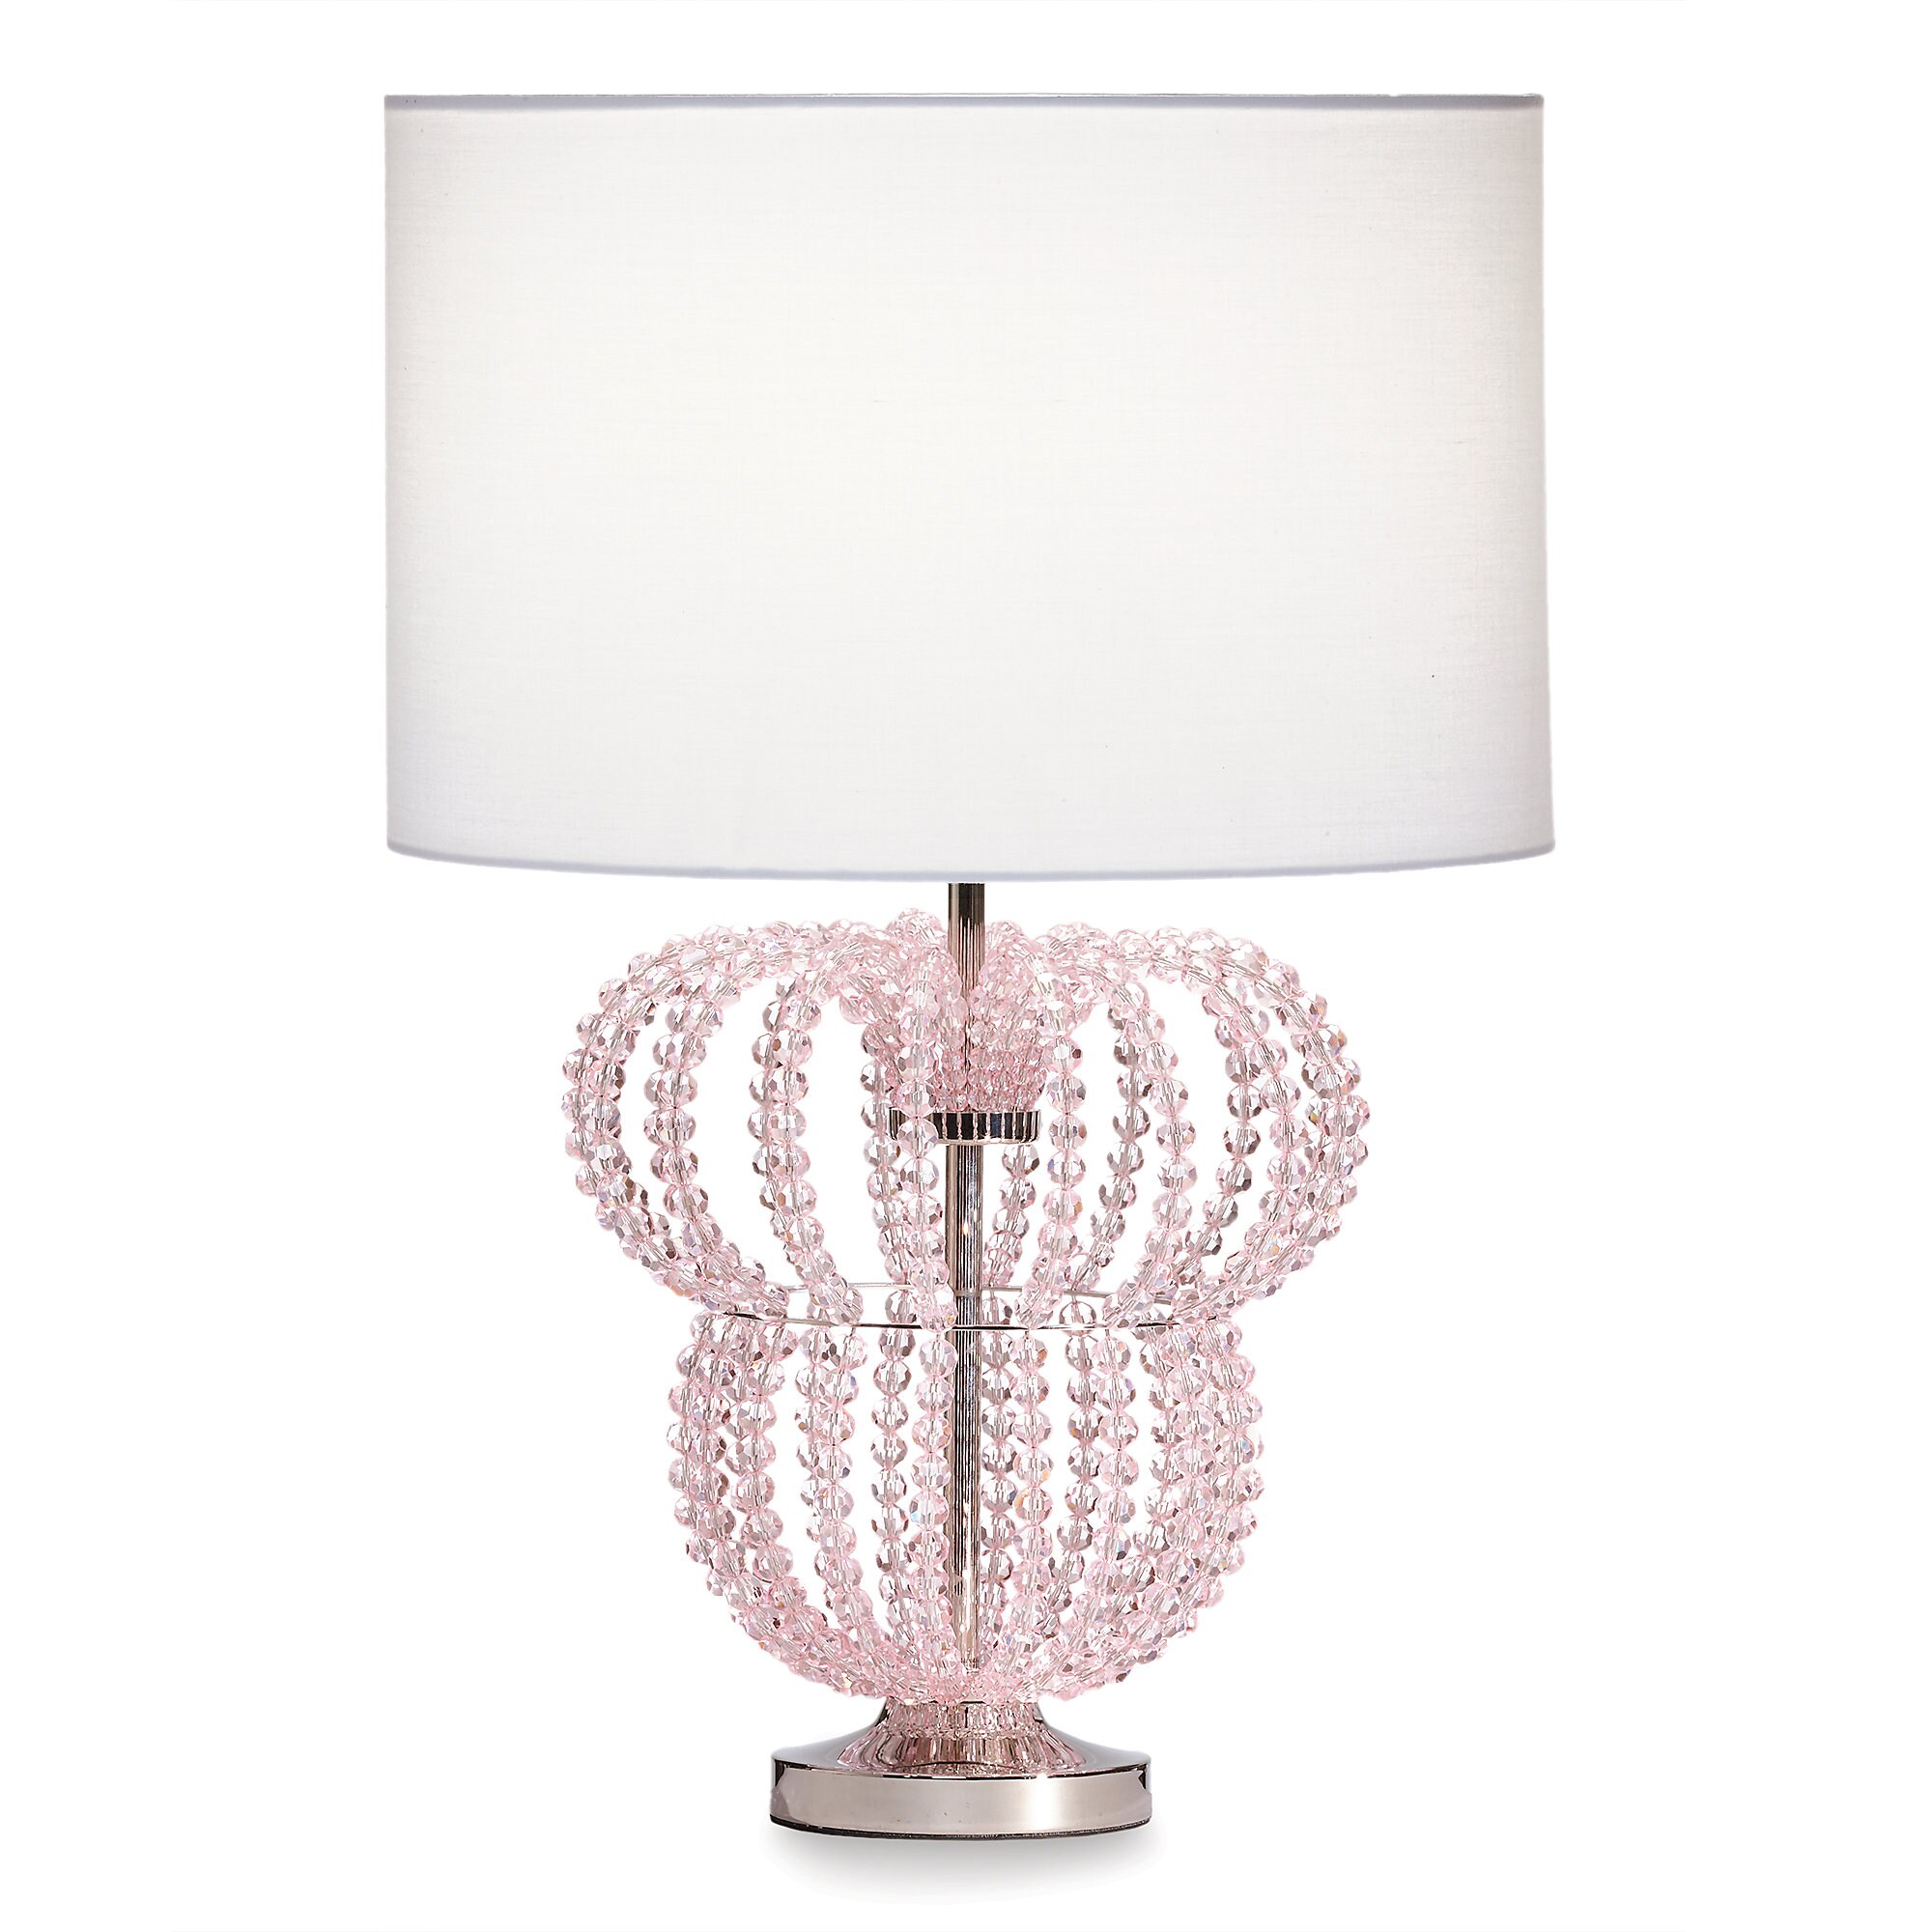 Minnie Mouse Beaded Accent Lamp by Ethan Allen